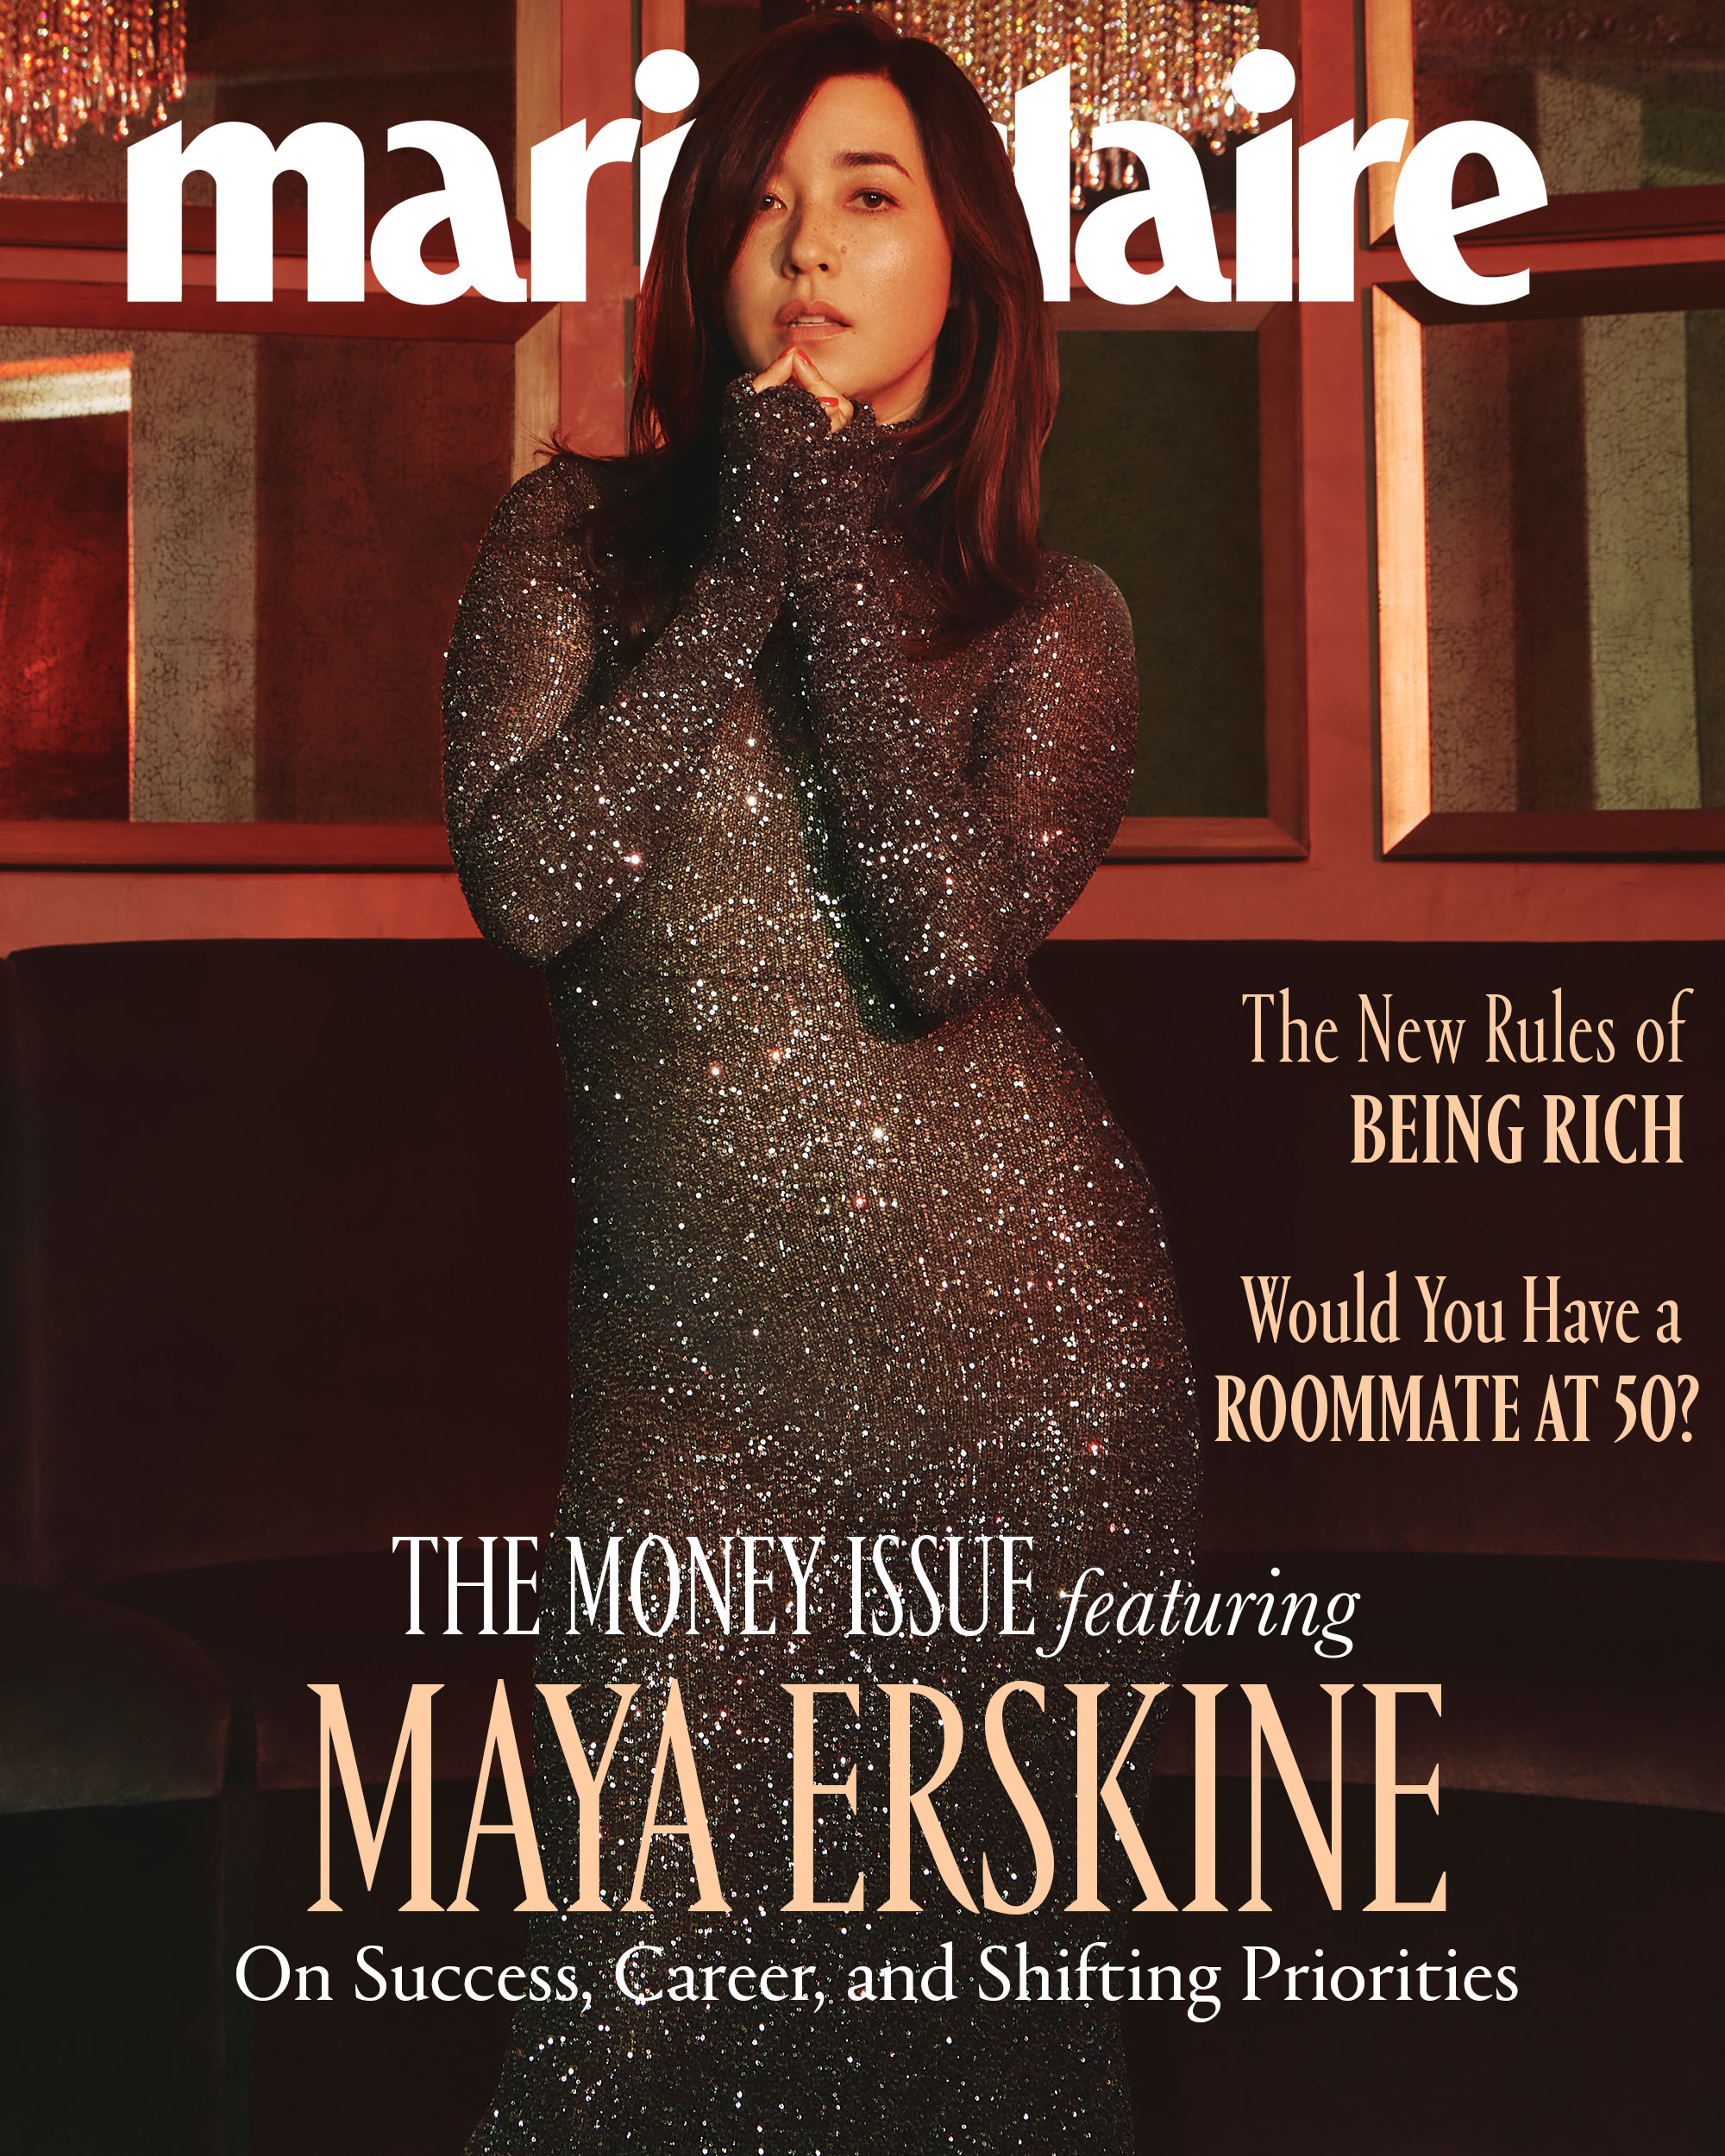 Cover of Marie Claire magazine with actress Maya Erskine in a black sparkly dress